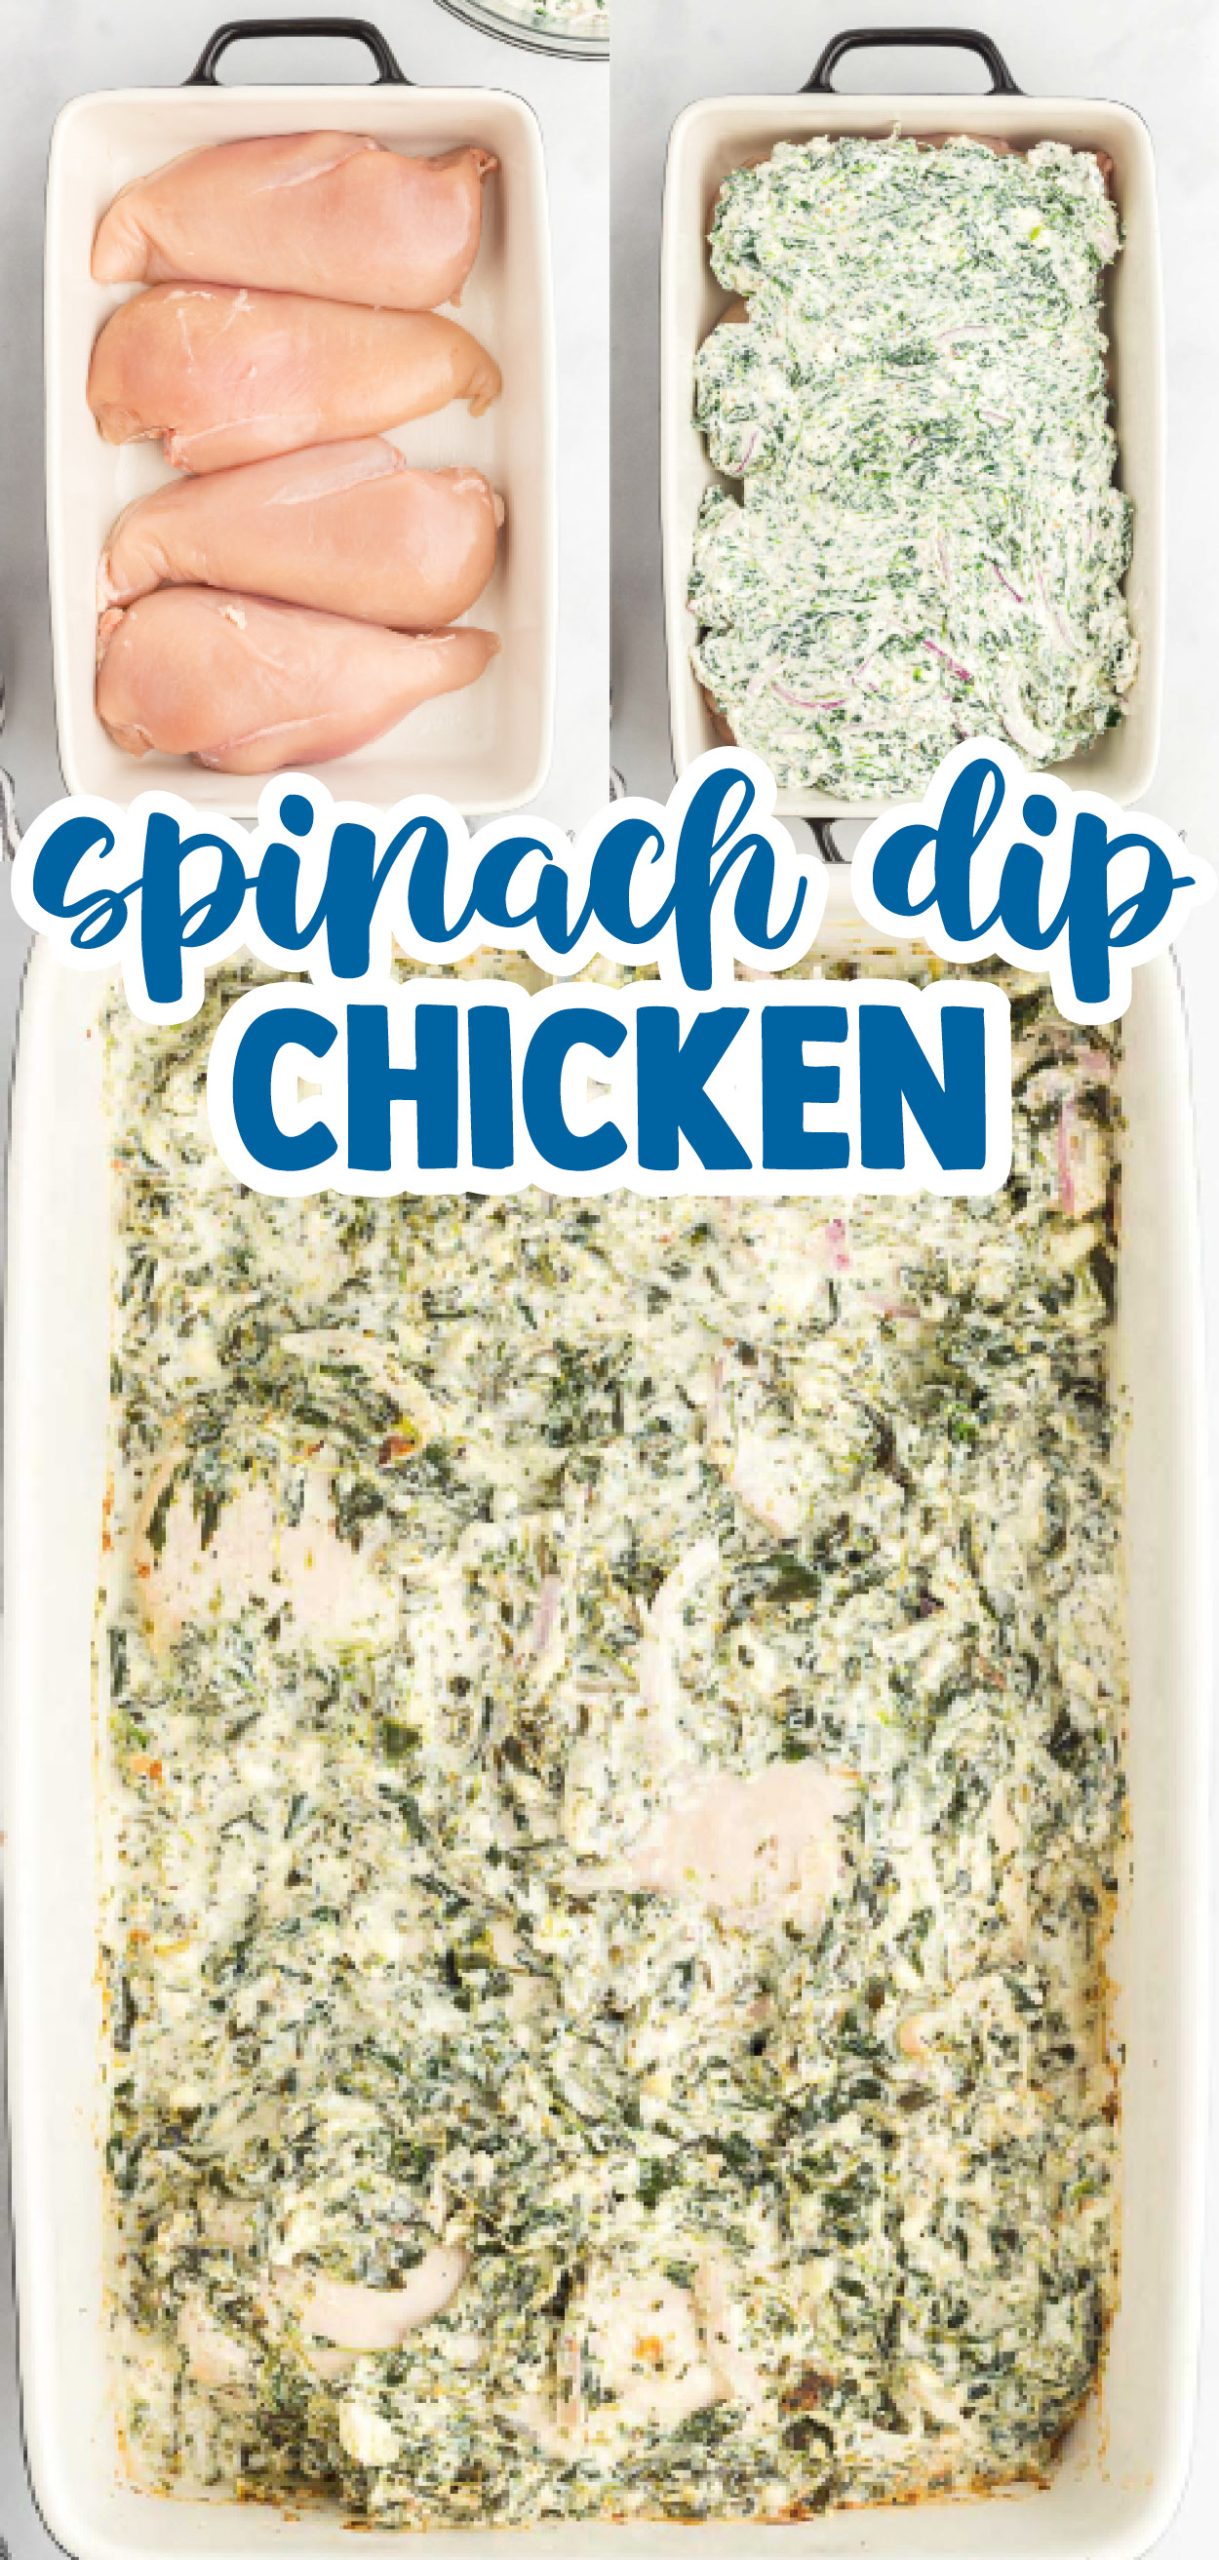 Spinach Dip Chicken Bake is everything you love about spinach dip but made into a meal! Ultra creamy baked chicken smothered in a spinach cheese sauce. Baked to perfection in just about 45 minutes! 